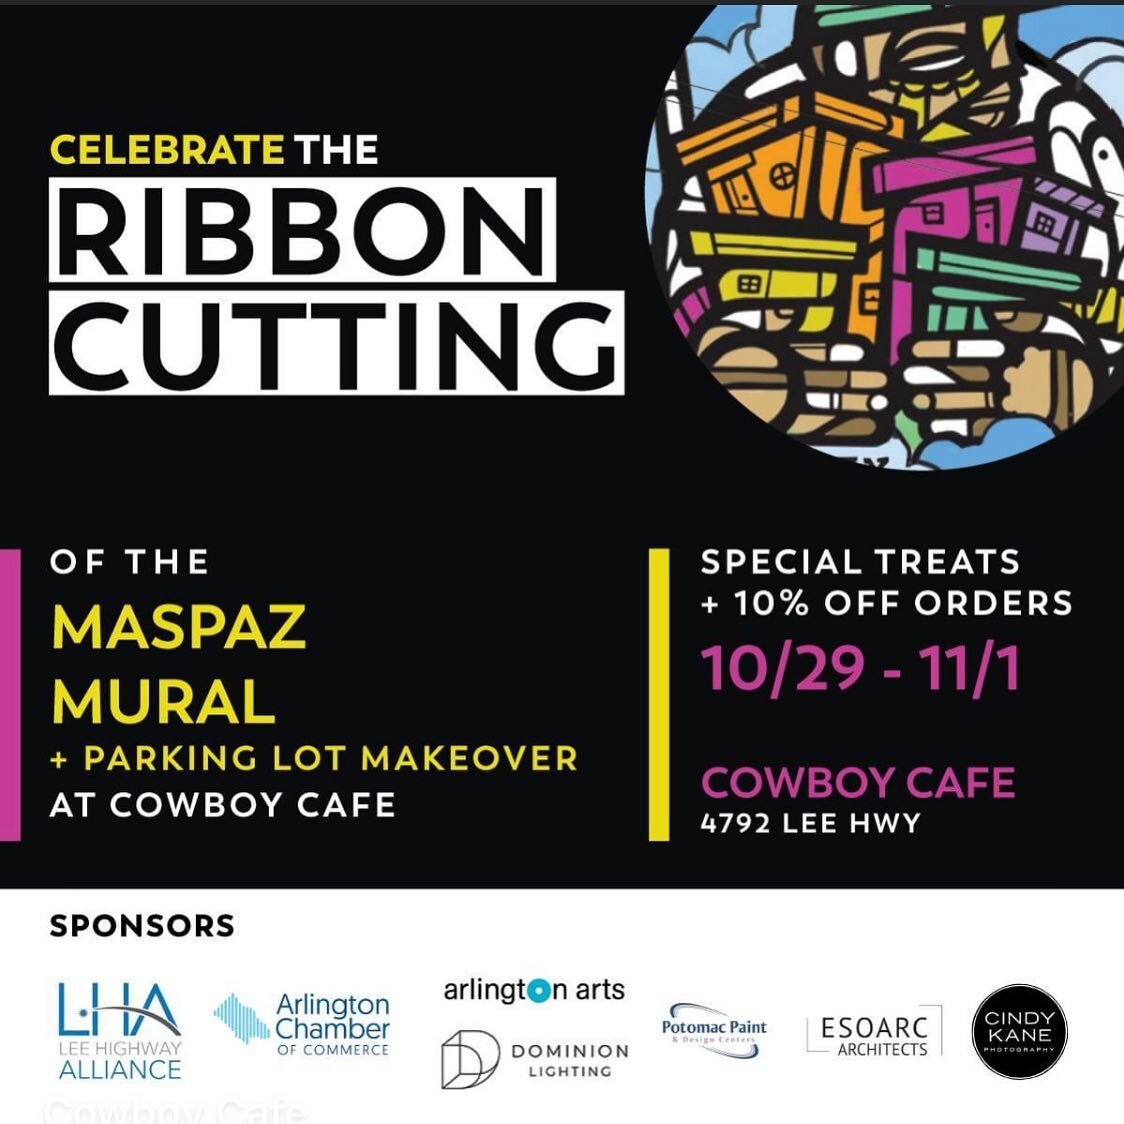 We are celebrating the official ribbon cutting of our new Mural Garden (props to local artist MasPaz) this Thursday through Sunday.  Come check it out or order online from our website and use promo code PATIO to get 10% off on all orders.